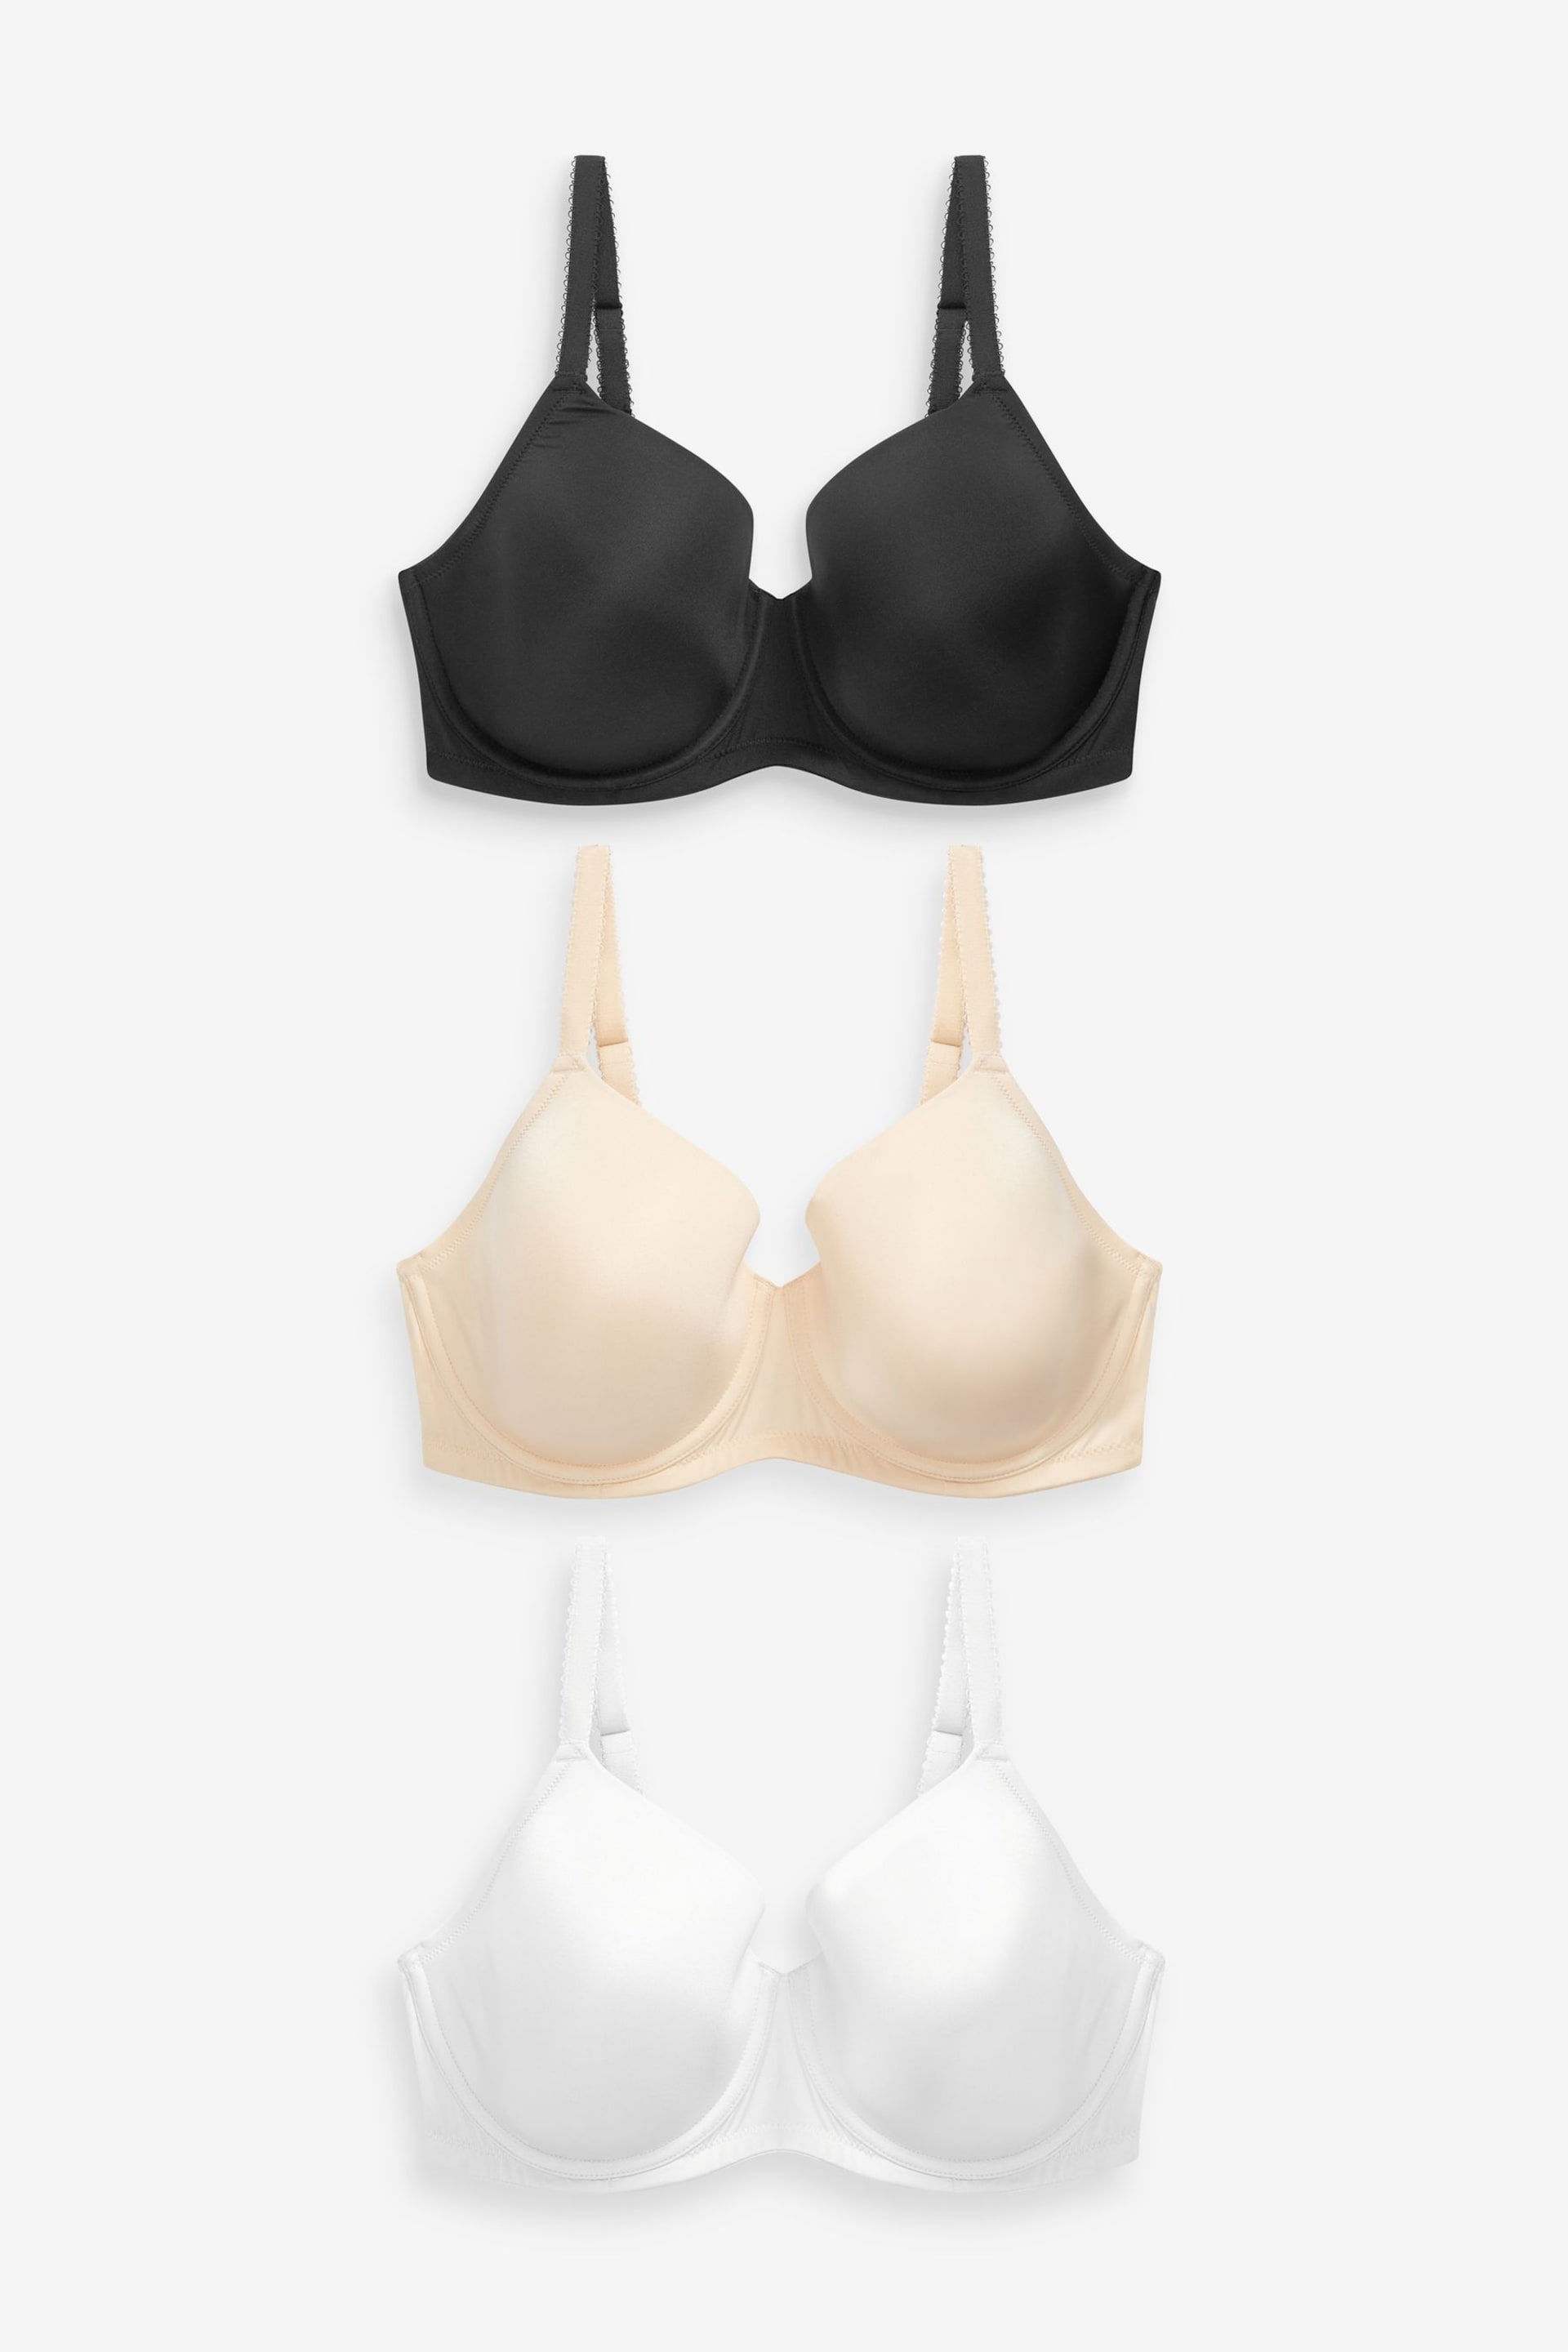 Black/White/Nude DD+ Pad Full Cup Smoothing T-Shirt Bras 3 Pack - Image 6 of 10